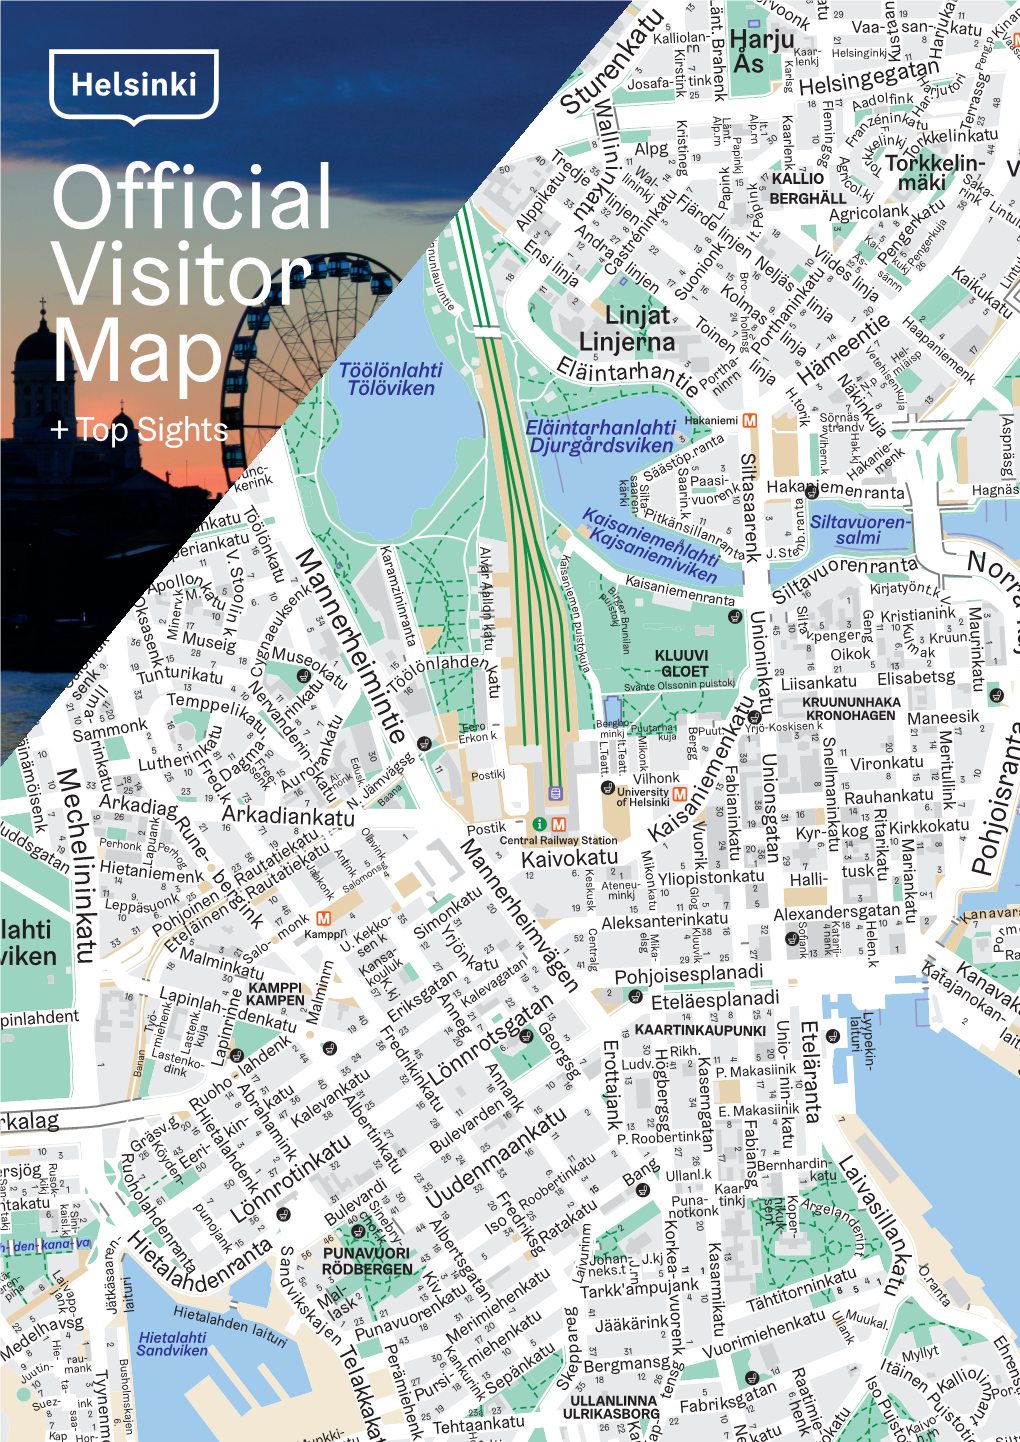 Official Visitor Map Published and Produced by Helsinki Marketing | Text by Helsinki Marketing | Printed in Finland by Newprint | Paper: G-Print 90 G/M2